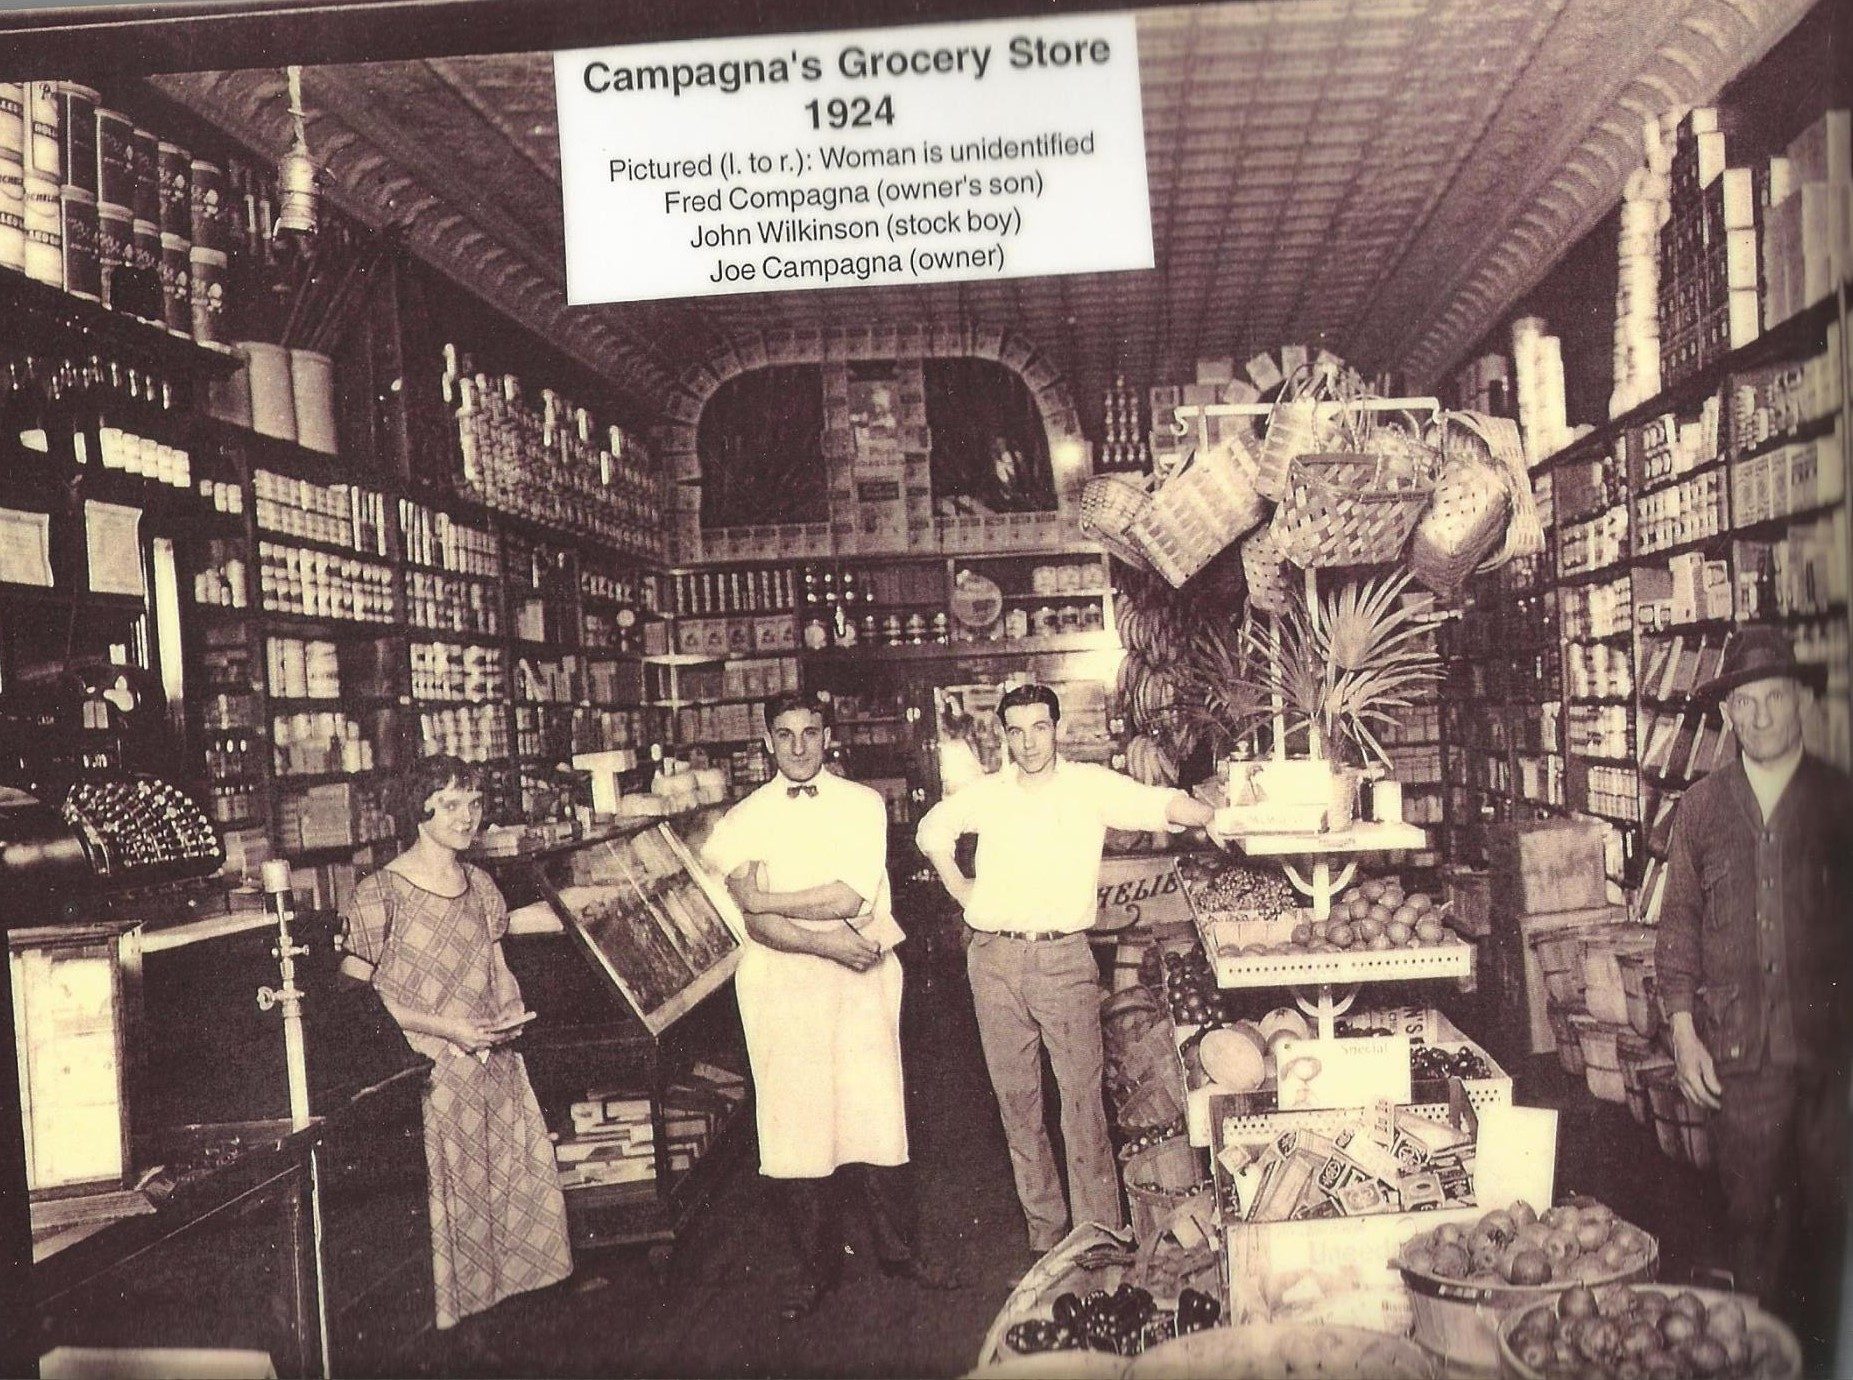 Independence, 1924. Campagna's Grocery Store. Located at 116 1st St. E. They closed in the late 1930's. Carl Randall then opened a pool hall and eventually sold ito Art Berger, who ran the smoke shop pool hall. Now occupied by Christian Life Church. This is one of the underground sites.